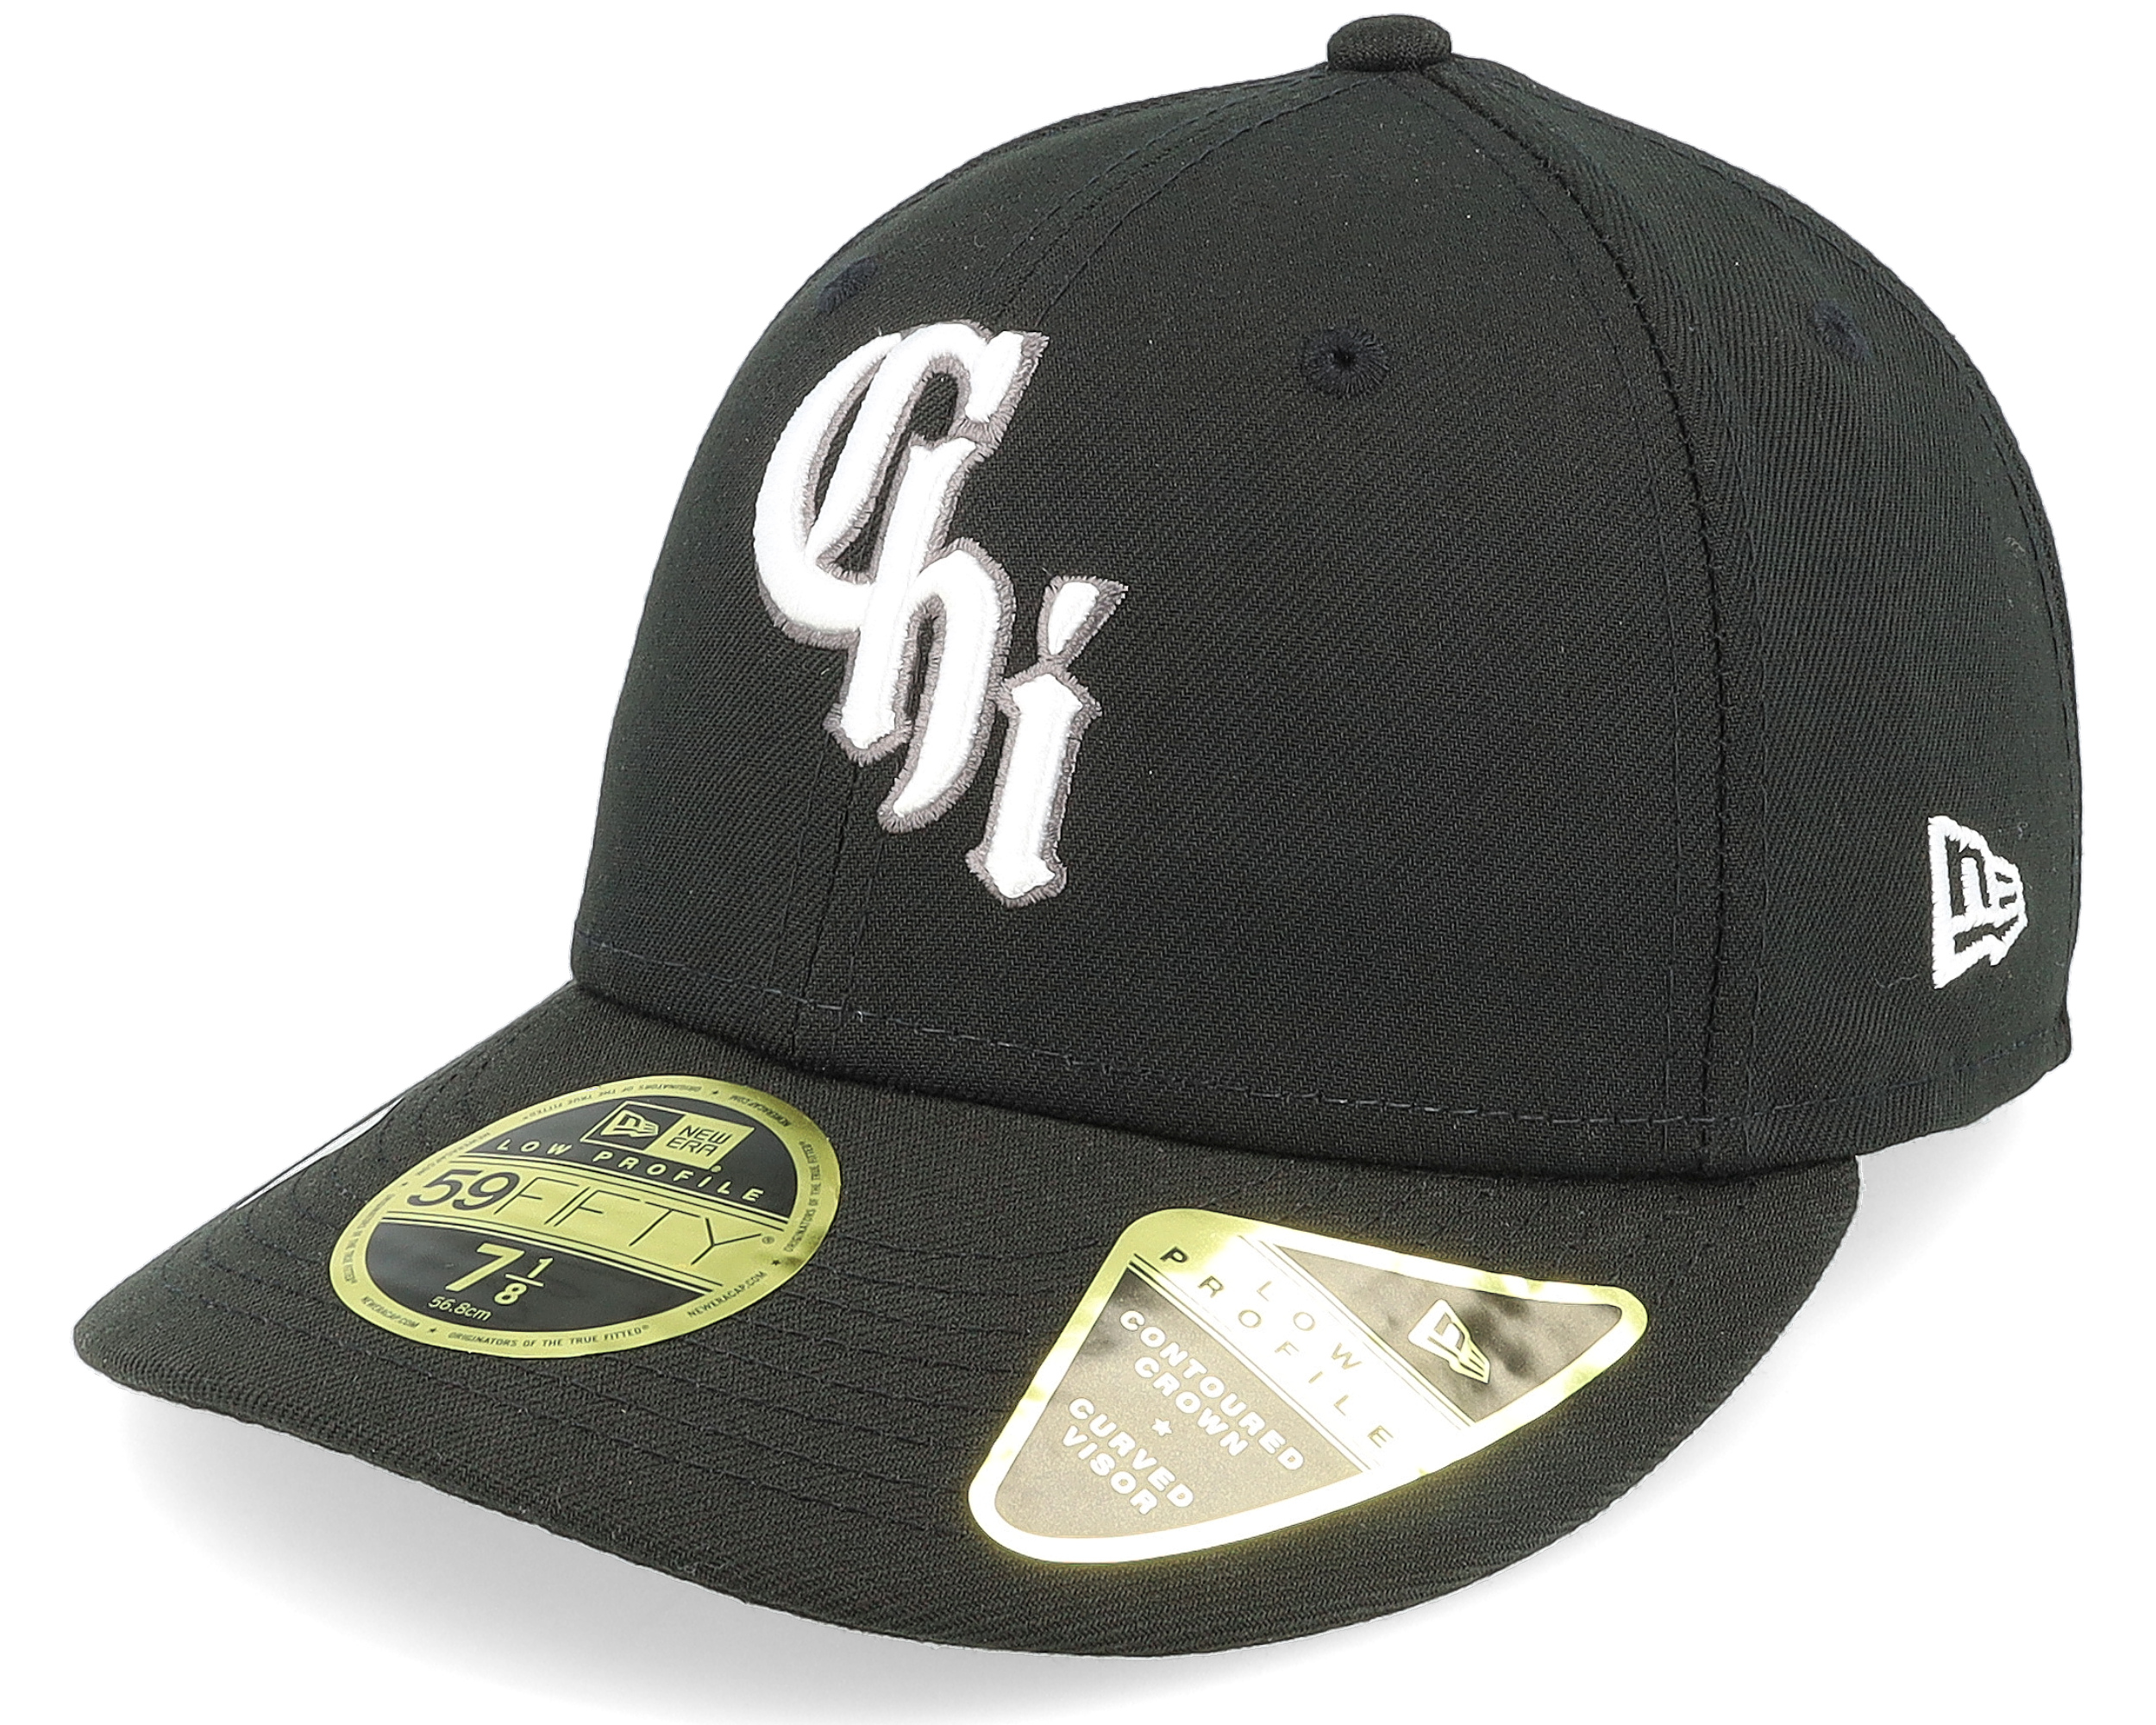 New Era - MLB Black fitted Cap - Chicago White Sox MLB21 City Connect Off Low Profile 59FIFTY Black Fitted @ Hatstore